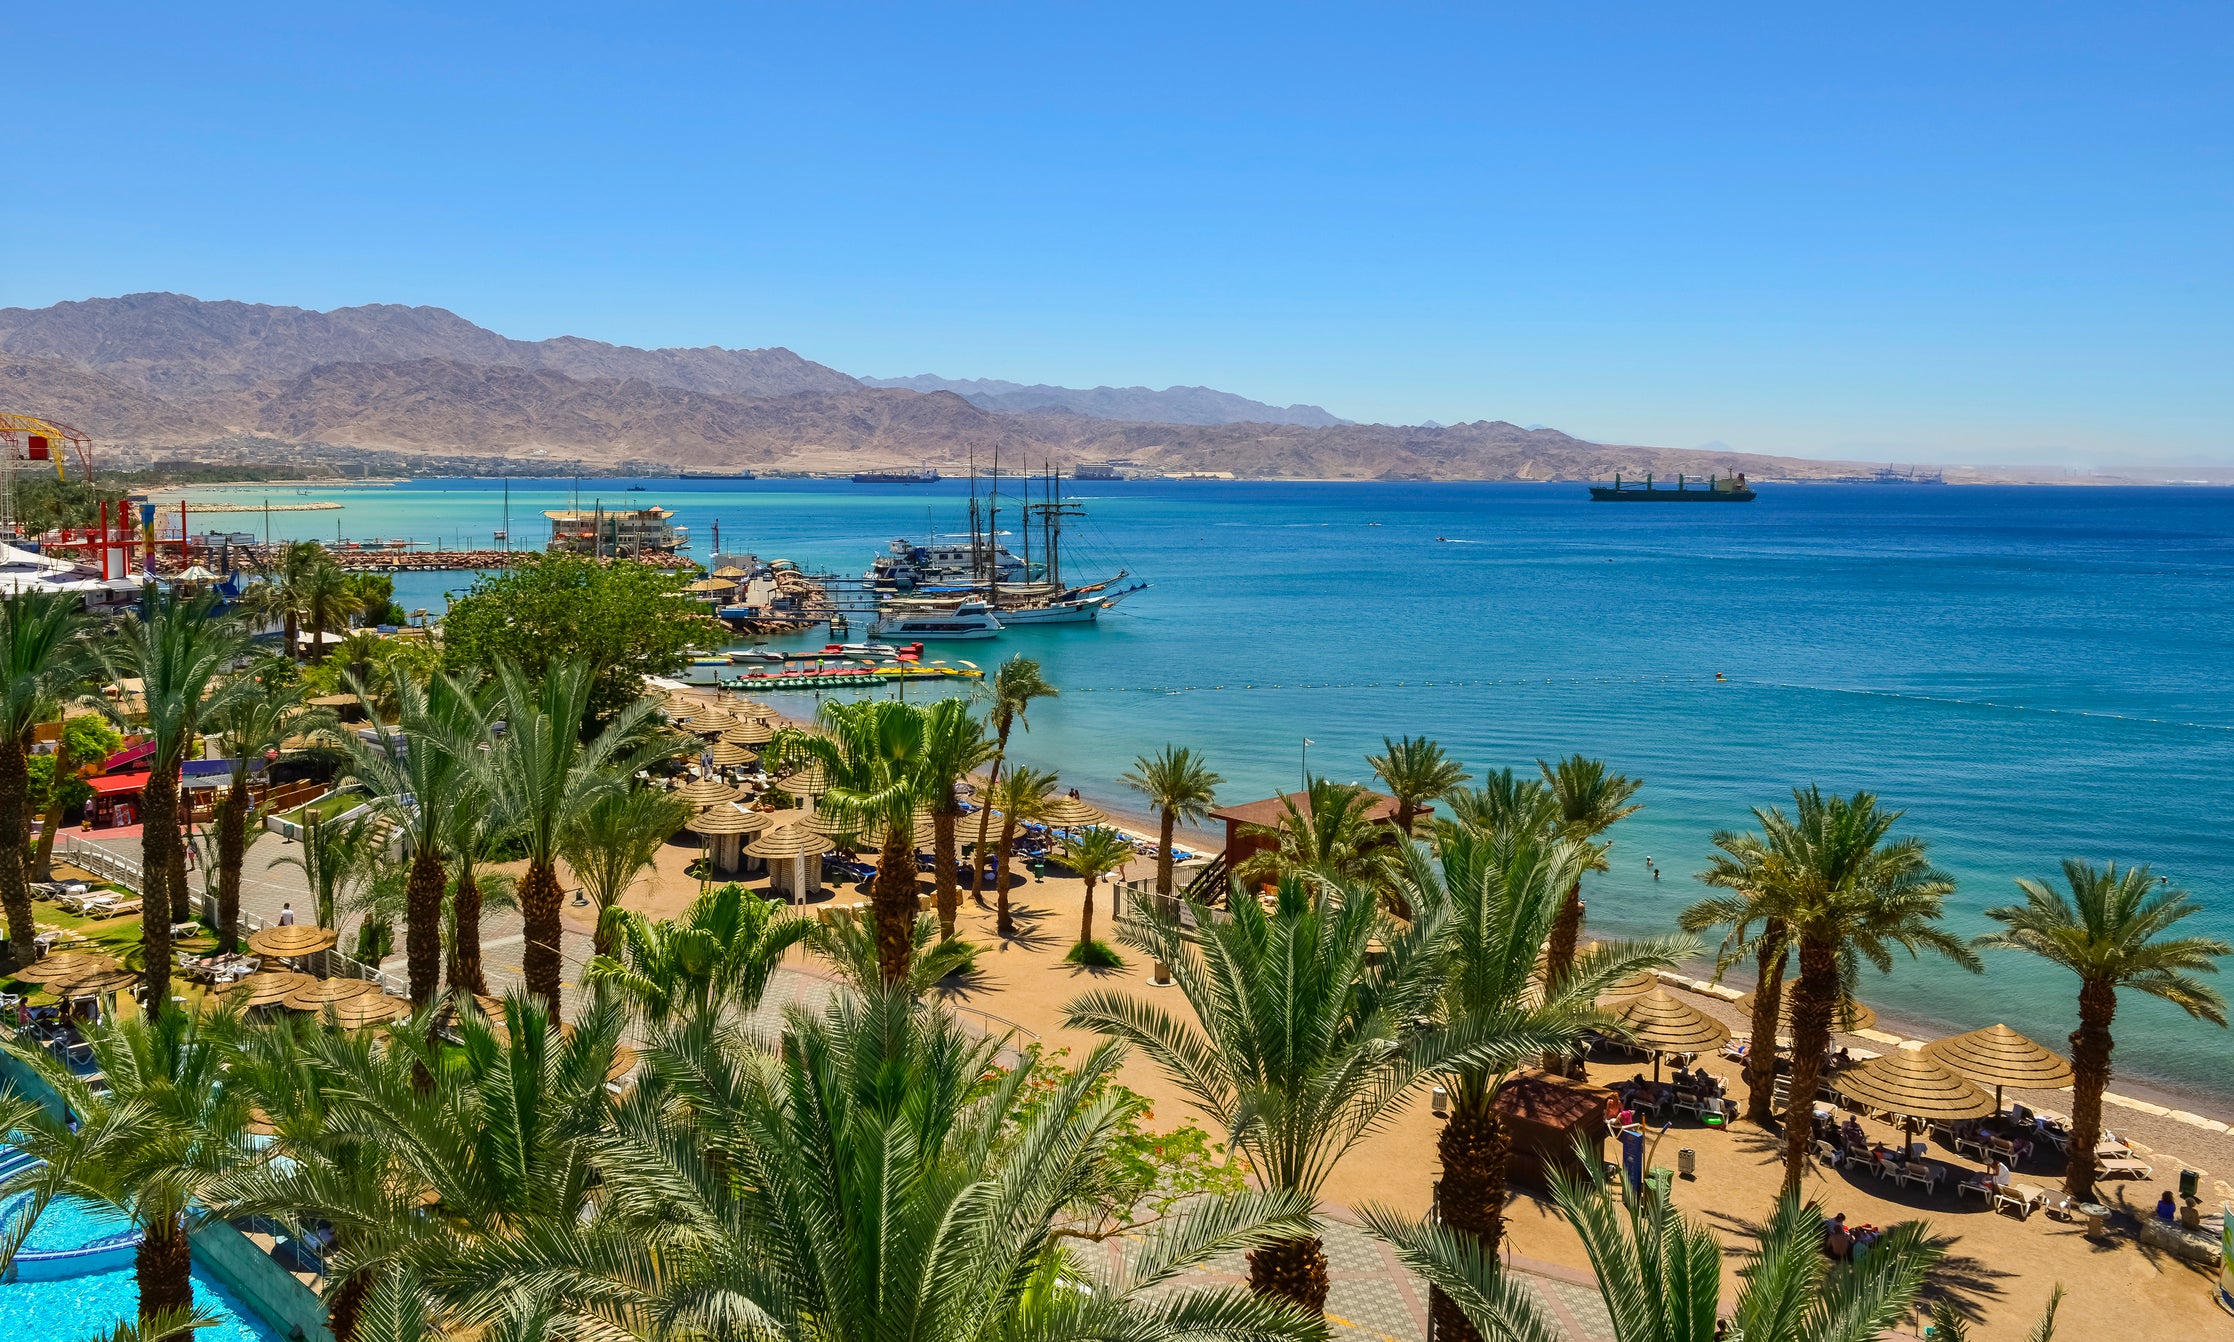 Eilat is a popular Red Sea "fly and flop" destination